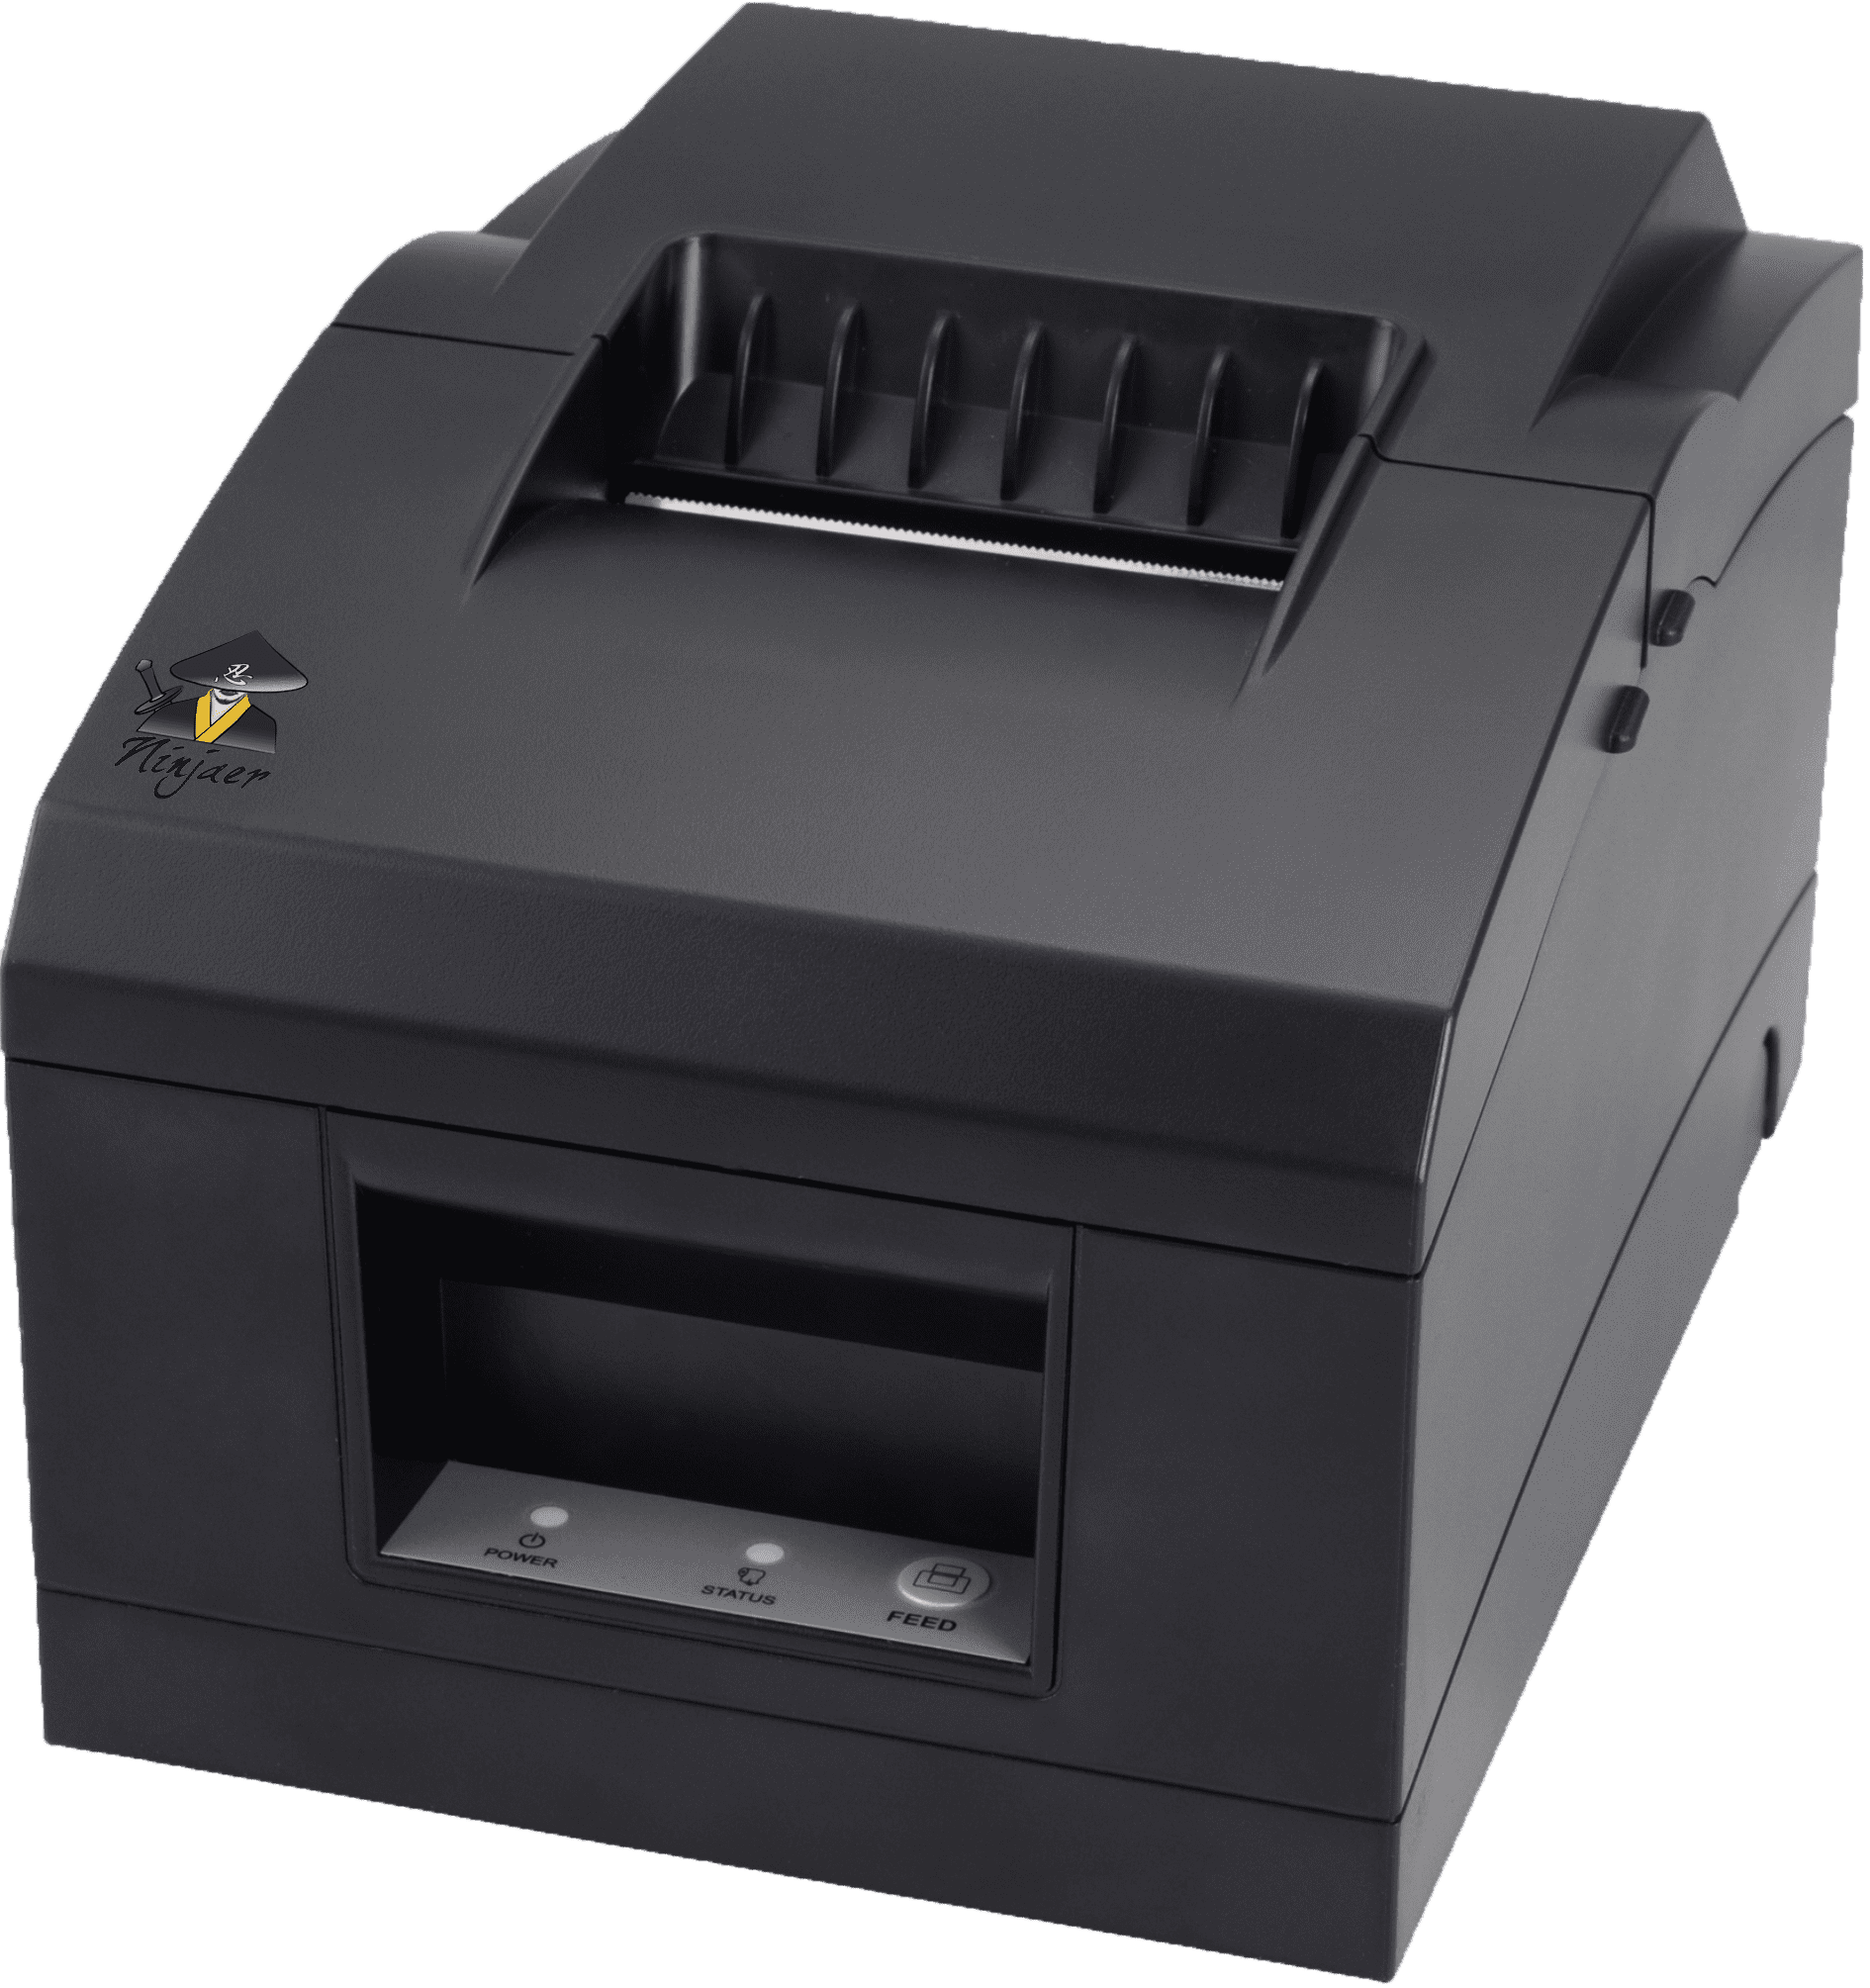 China China Cheap Price China Label Producer 76mm Dot Matrix Receipt Printer Ec 7010t With Usb Is Used For Win 9x Win Me Win 00 Win 03 Win Nt Win Xp Win Vista Win 7 Win 8 Win 8 1 Linux Opos Win 10 Apple